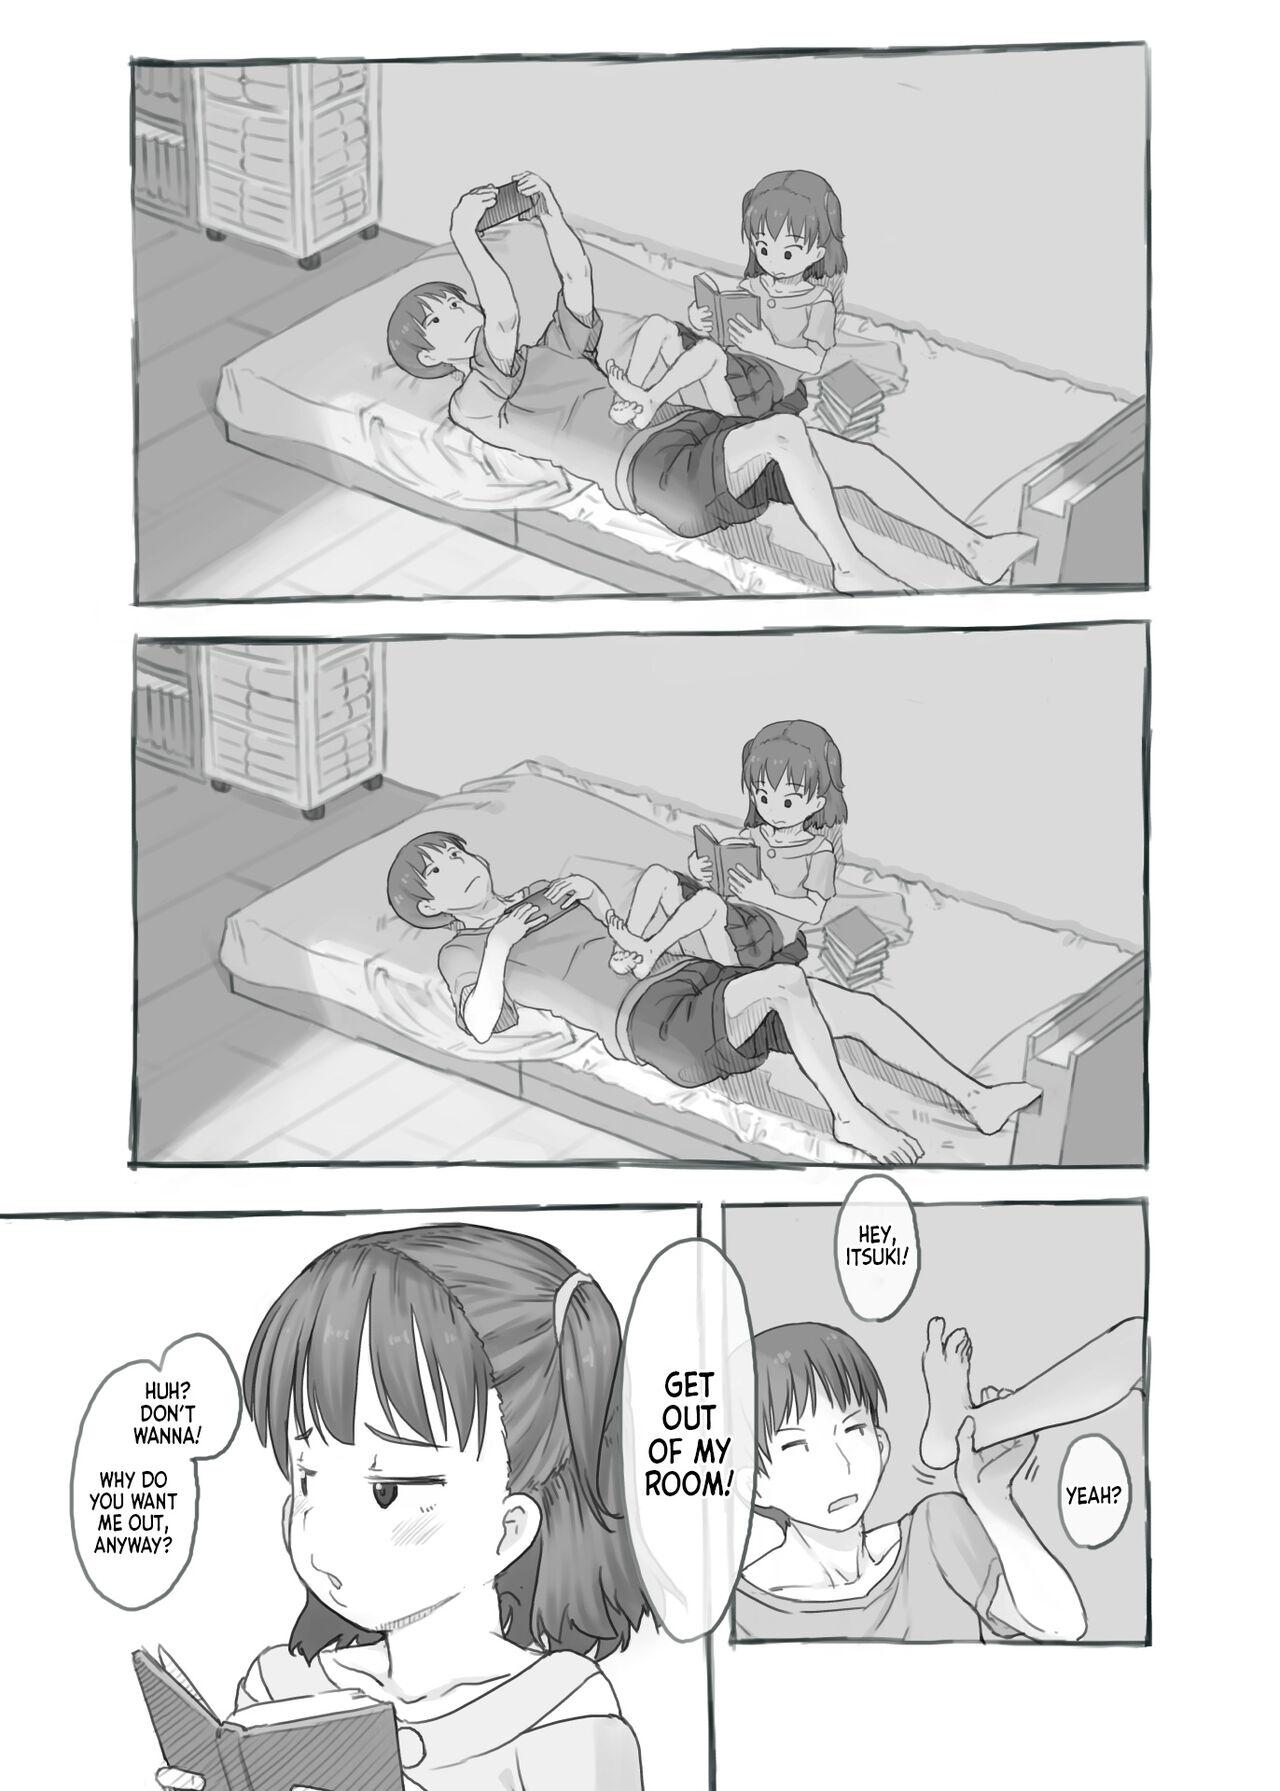 She Imouto to Nuku | Fap Sessions with my Little Sister! - Original Cumload - Page 8